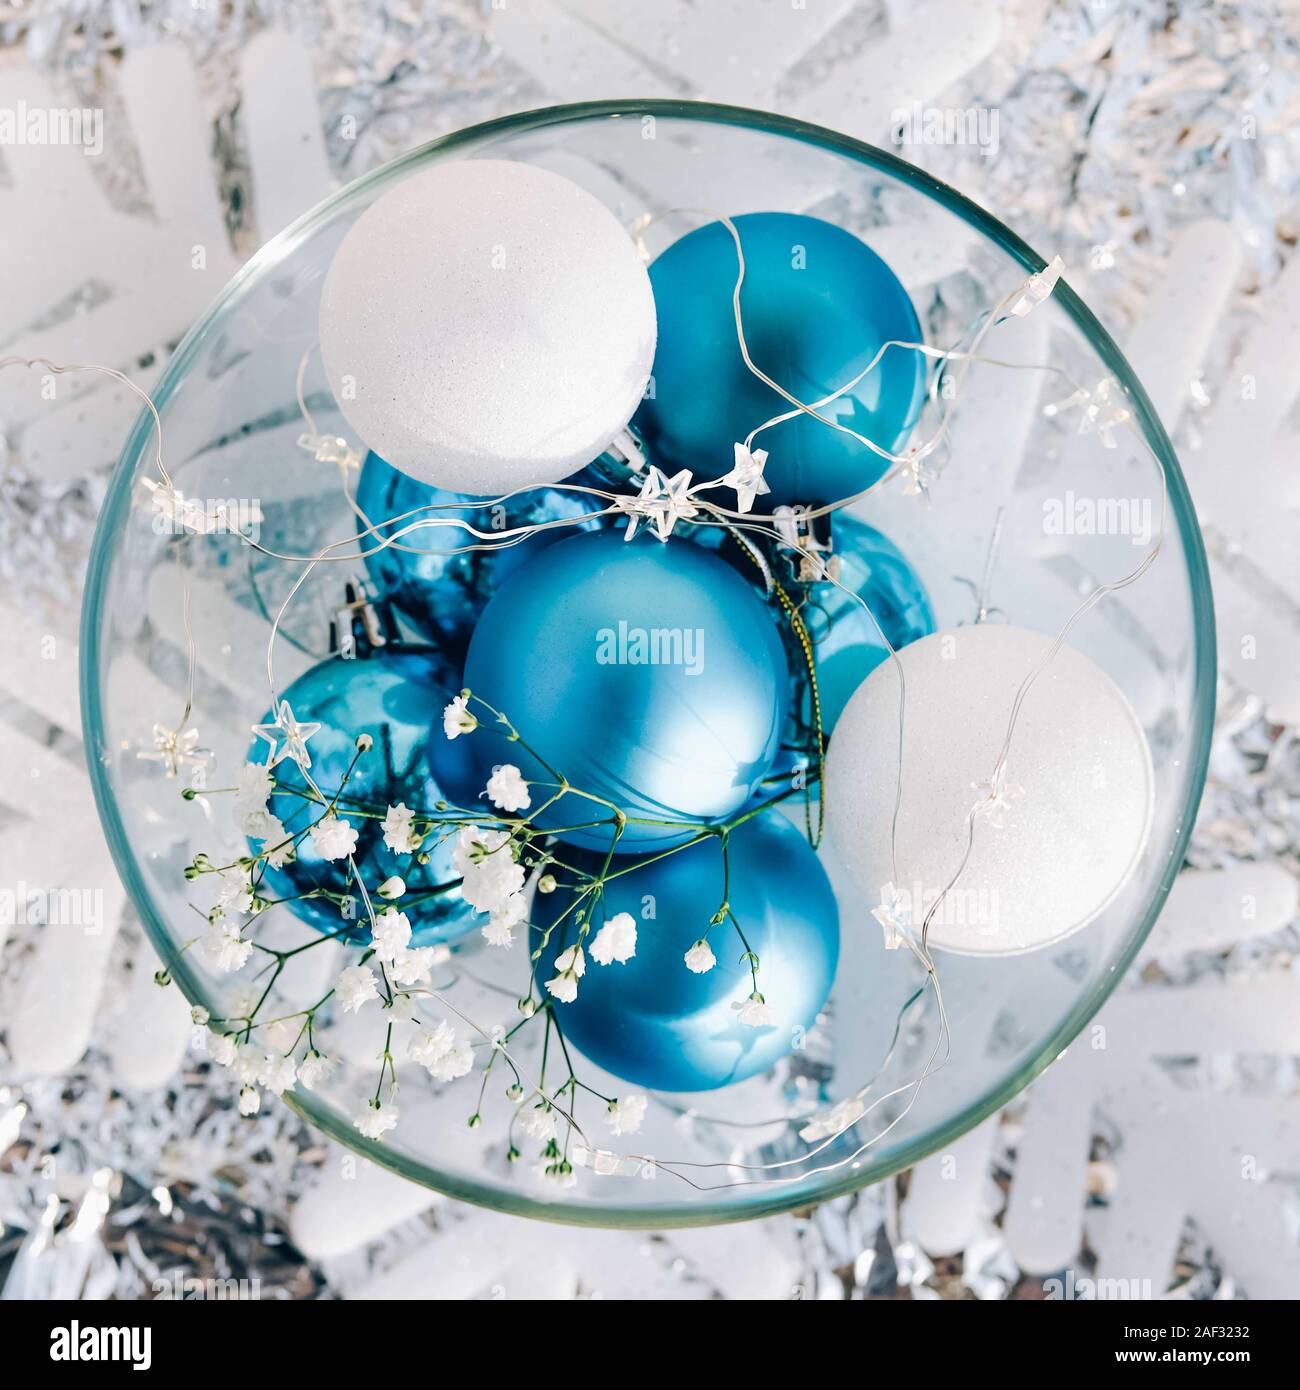 White and blue holiday decorations on silver background. Christmas balls, candle and fairy lights.Color of the year concept. Stock Photo